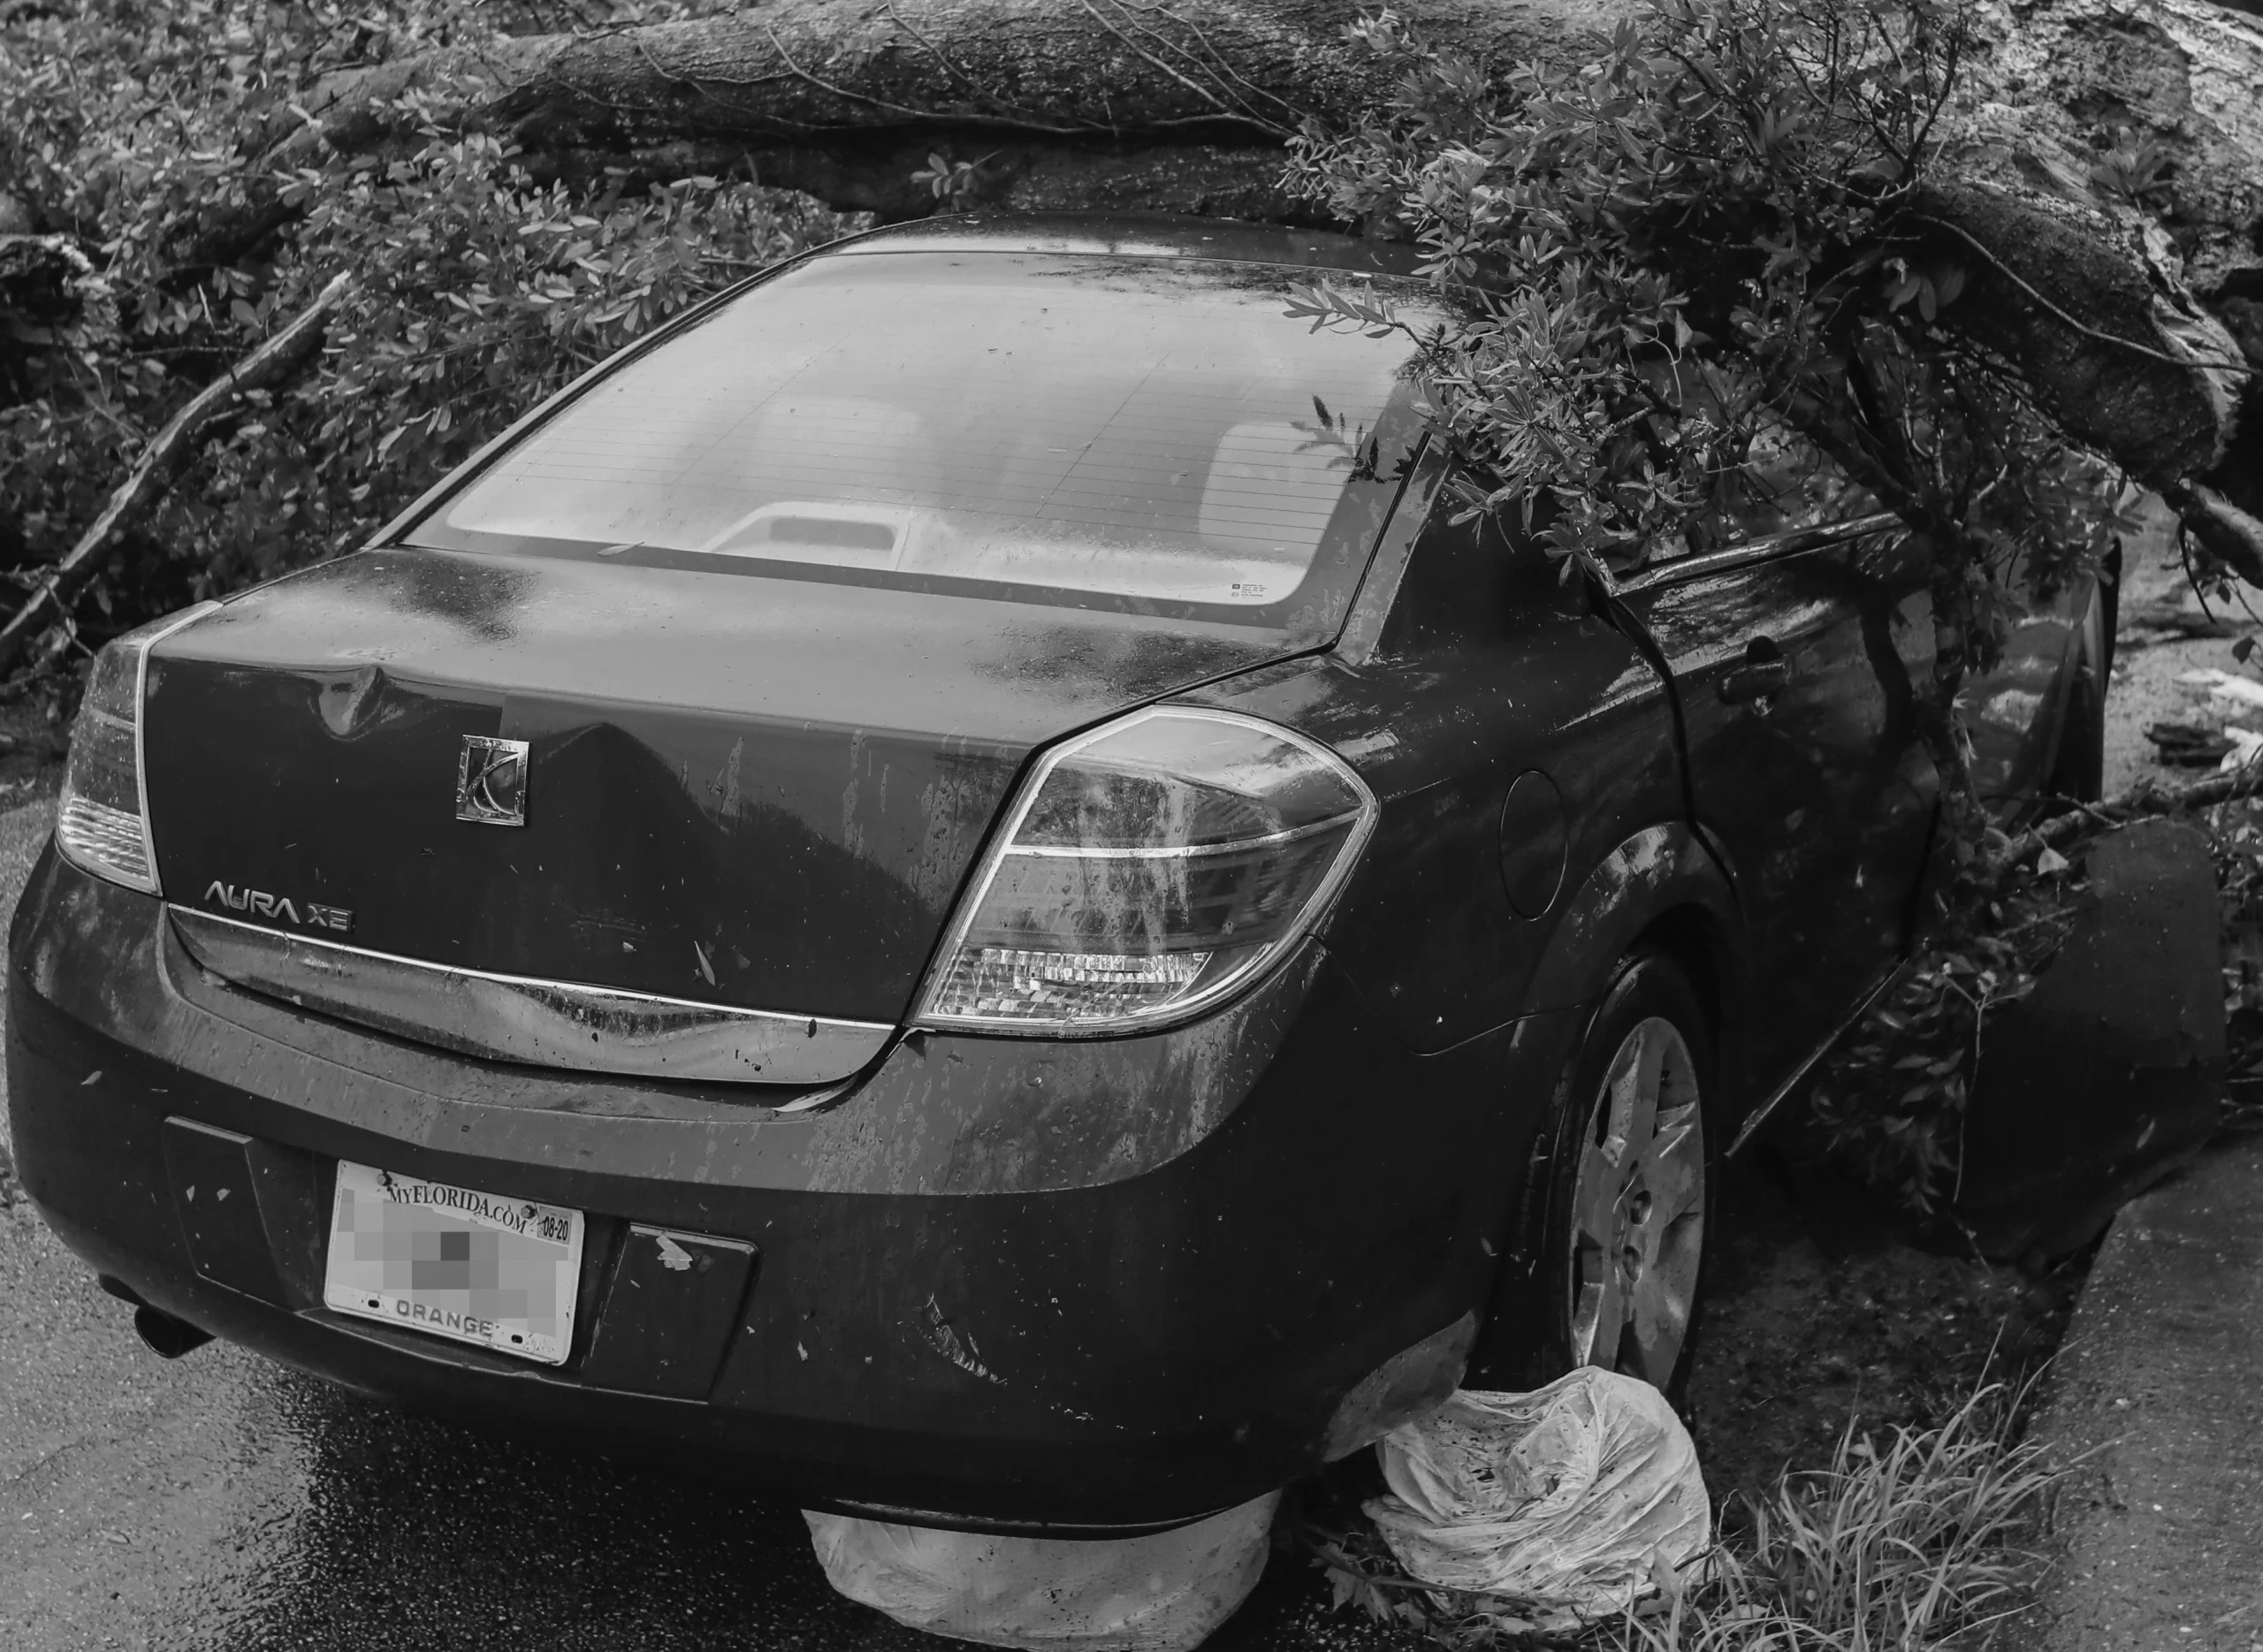 Rear view of a car crushed by a fallen tree in flood-affected area.